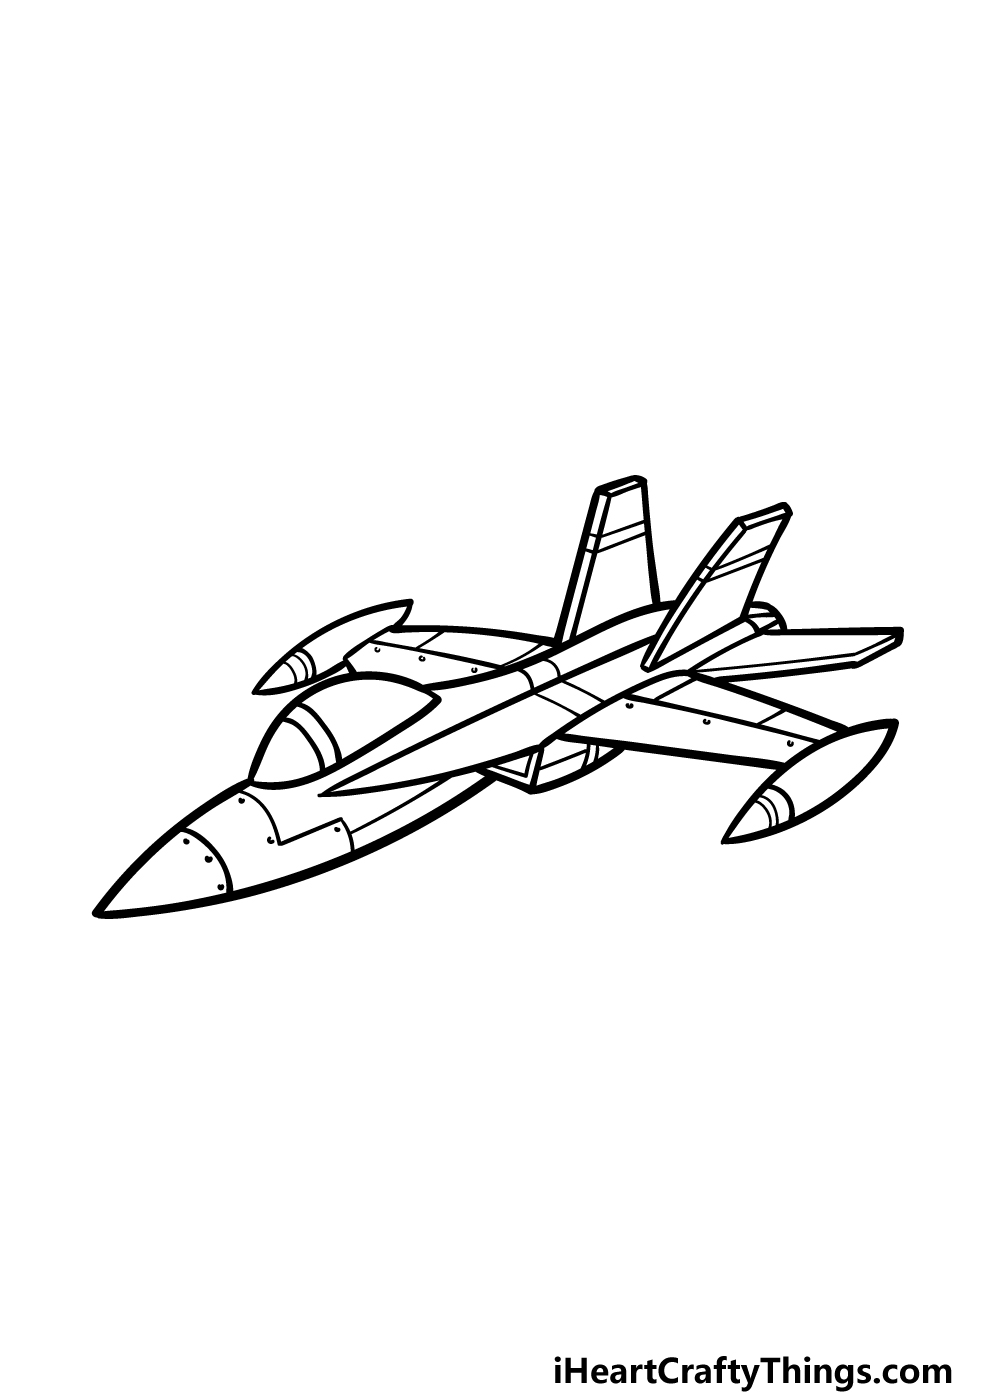 how to draw a Jet step 5